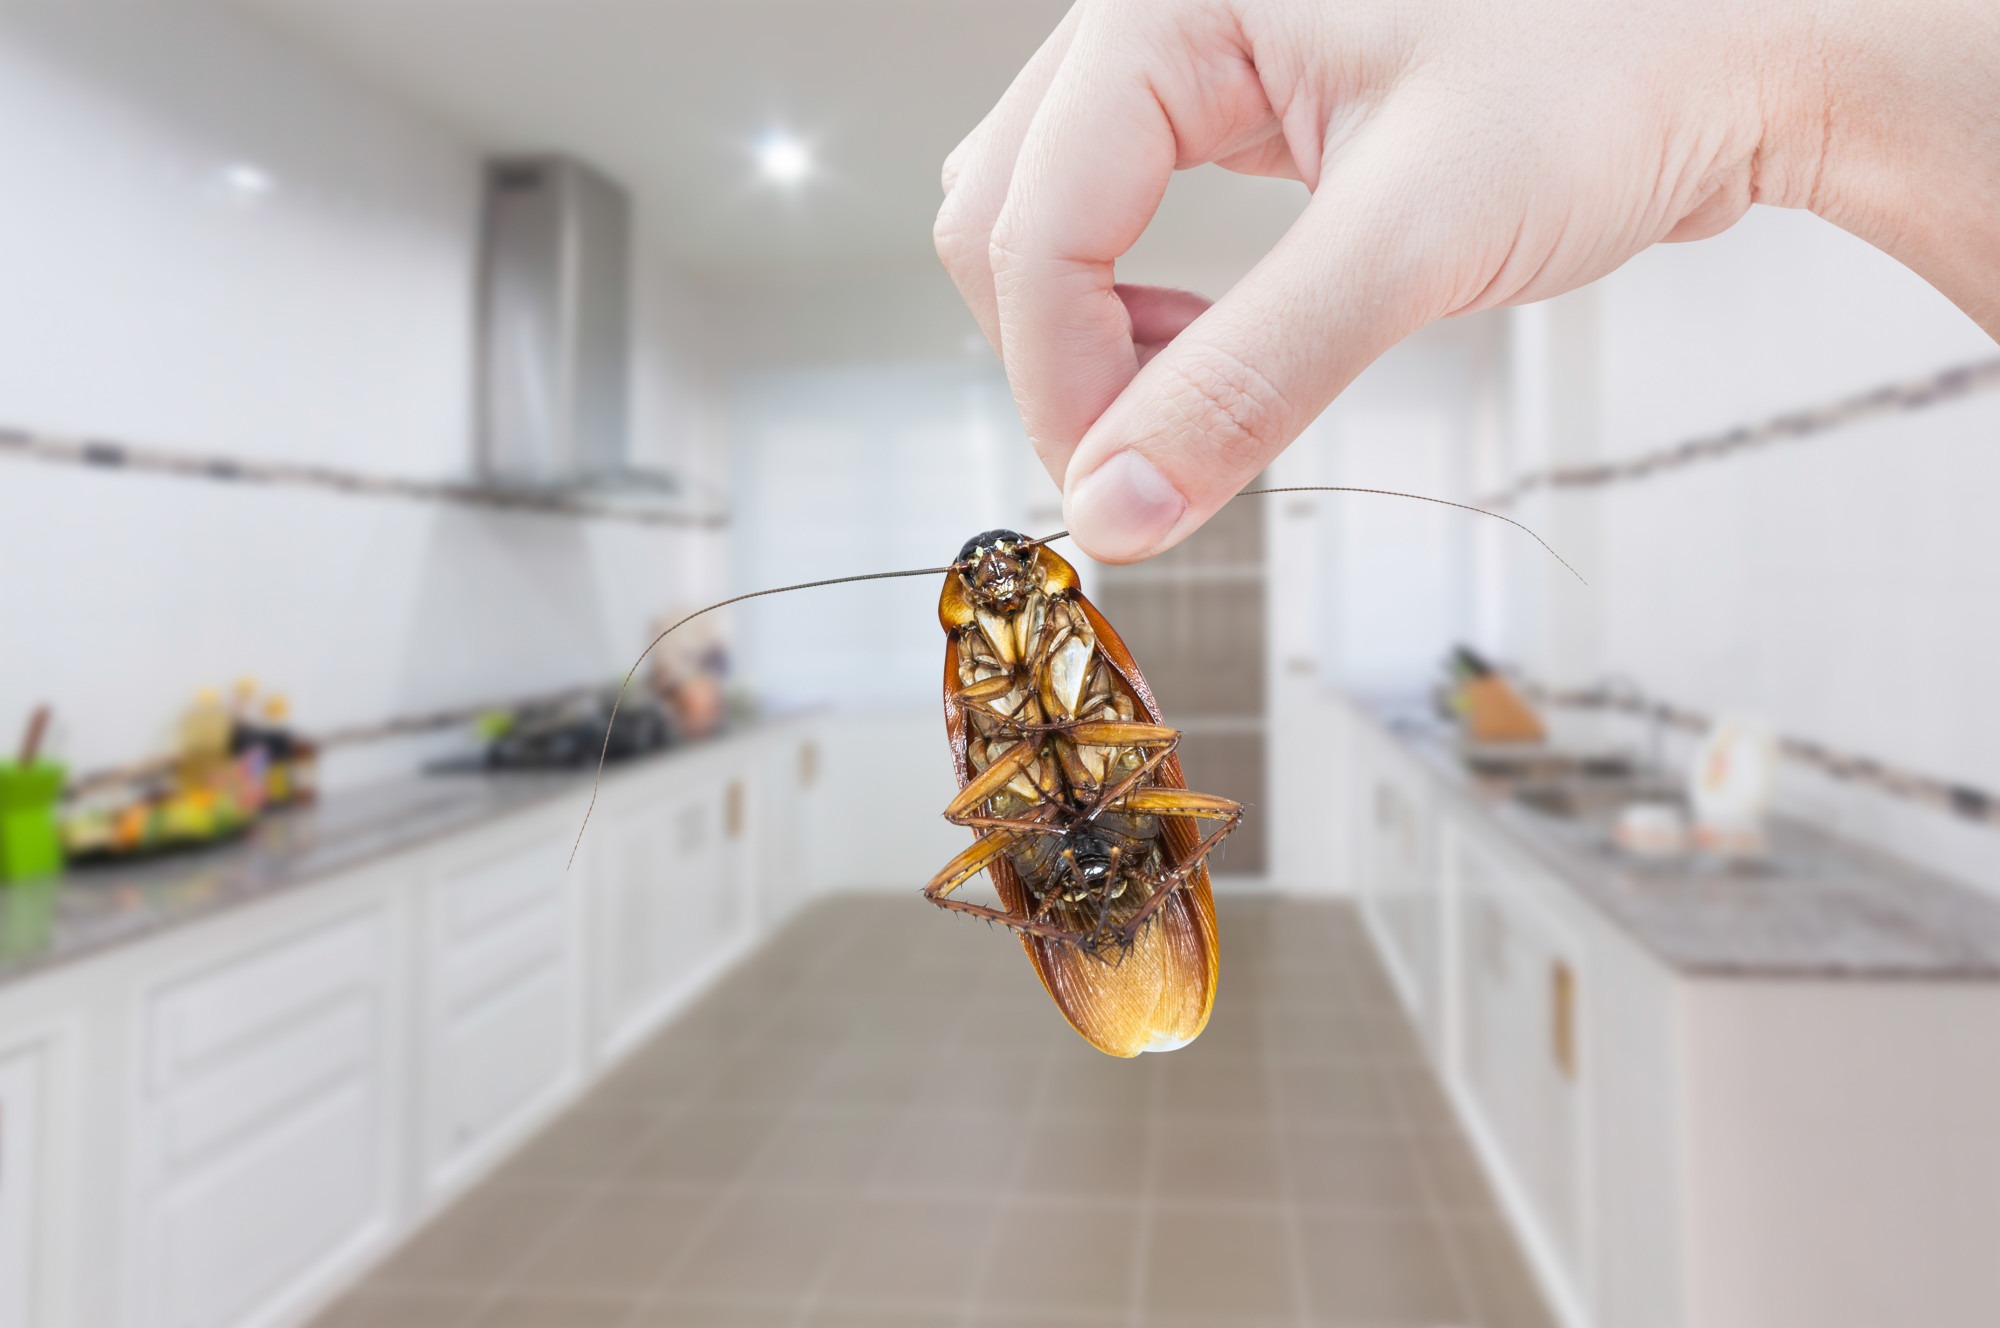 https://planetfriendlypestcontrol.com/wp-content/uploads/2019/11/how-to-keep-insects-out-of-your-house.jpeg